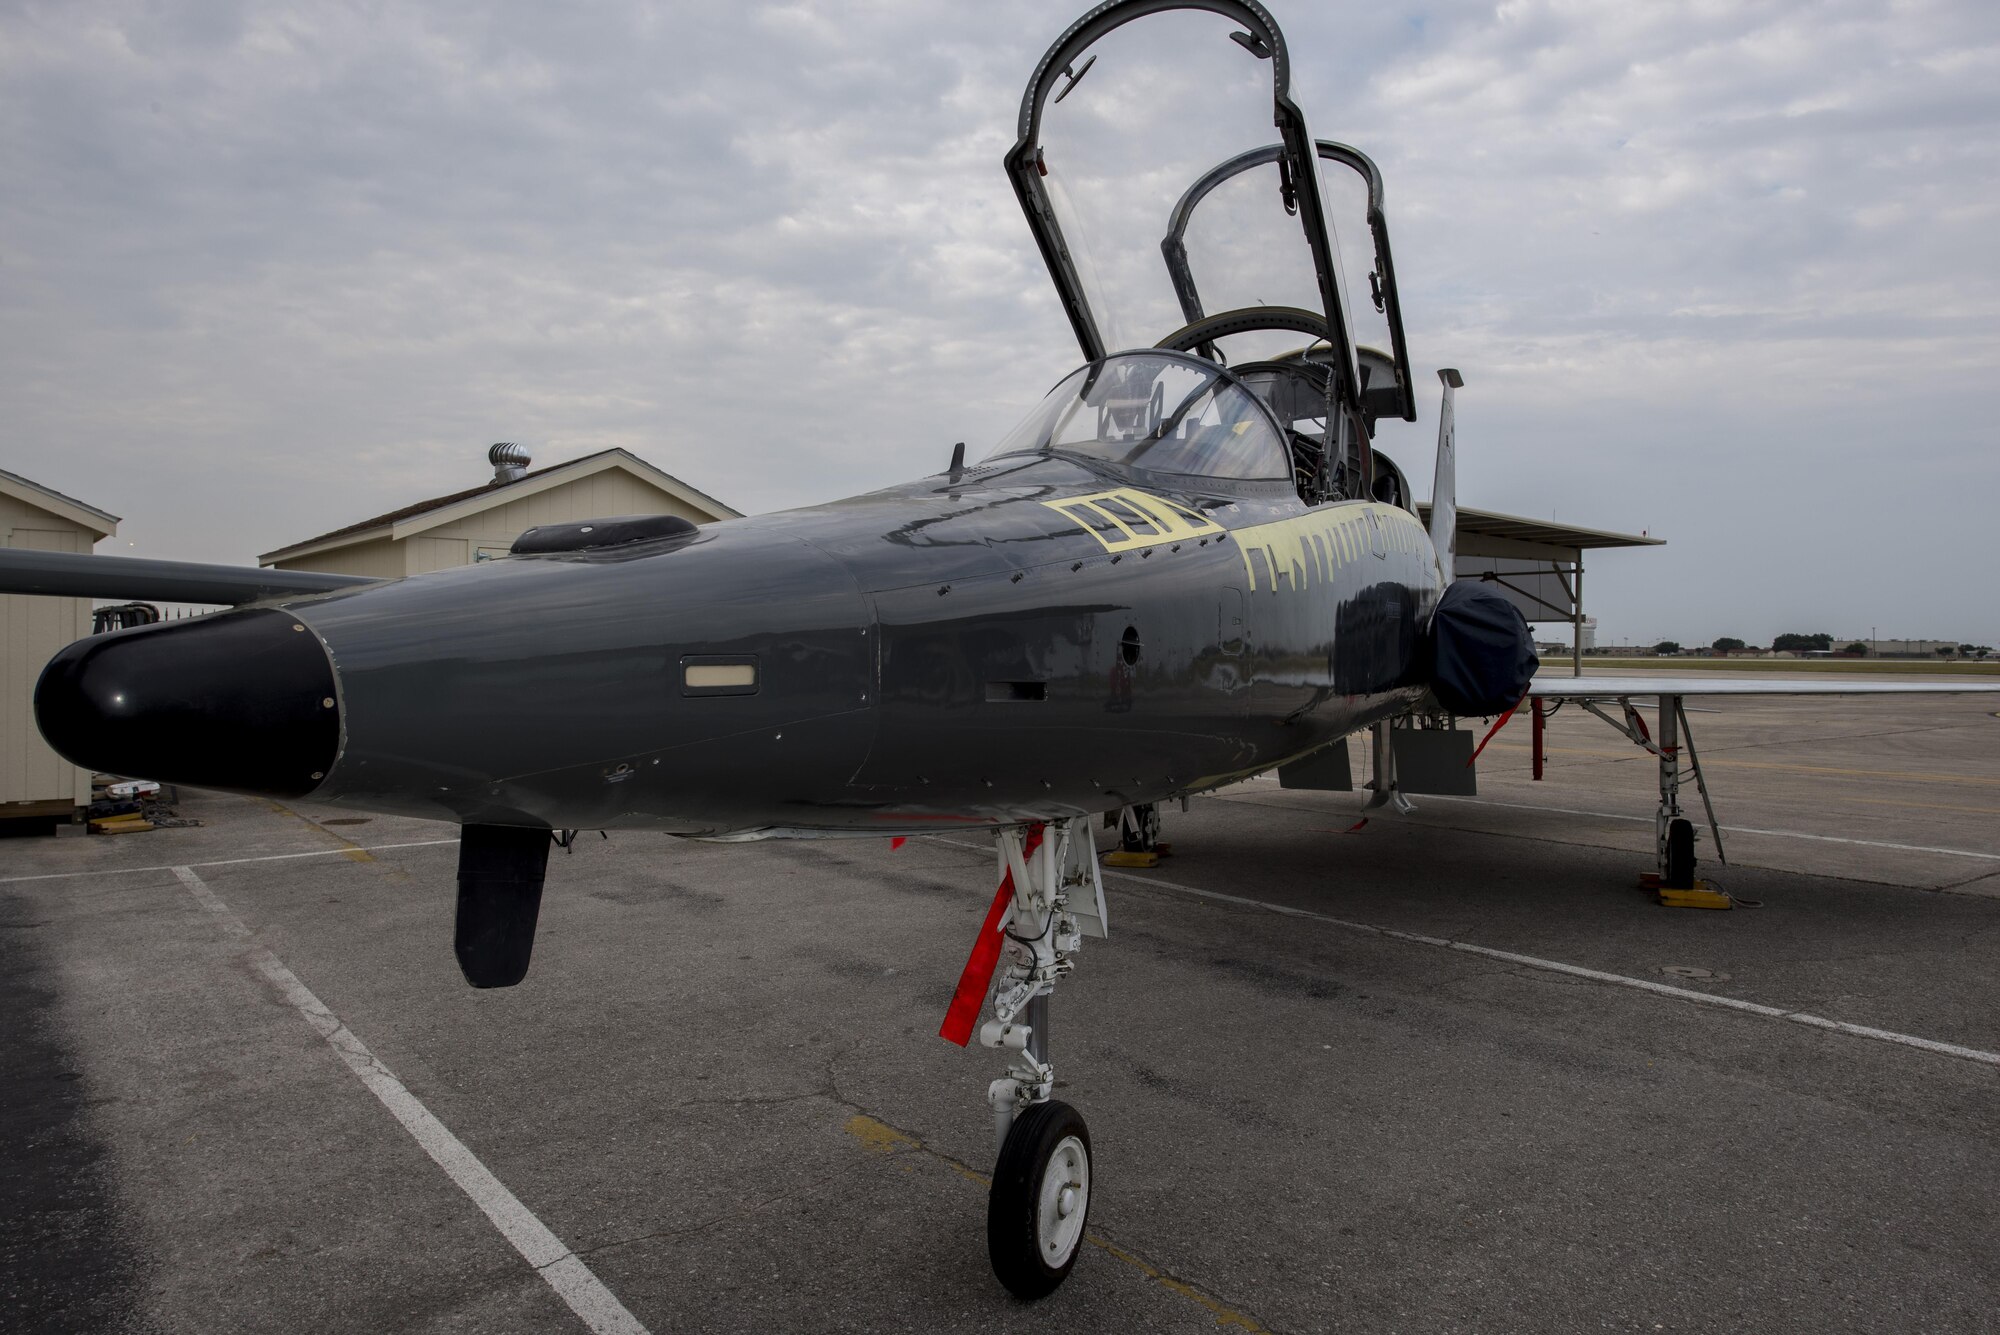 The first completed T-38 Talon from the PACER Classic III structural-modification program is unveiled July 31, 2015, at Joint Base San Antonio-Randolph, Texas. Pacer Classic III (PC III) represents the largest single structural modification ever undertaken on the T-38 aircraft and will extend the service life of the modified aircraft by 15-20 years. (U.S. Air Force photo by Airman 1st Class Stormy Archer)